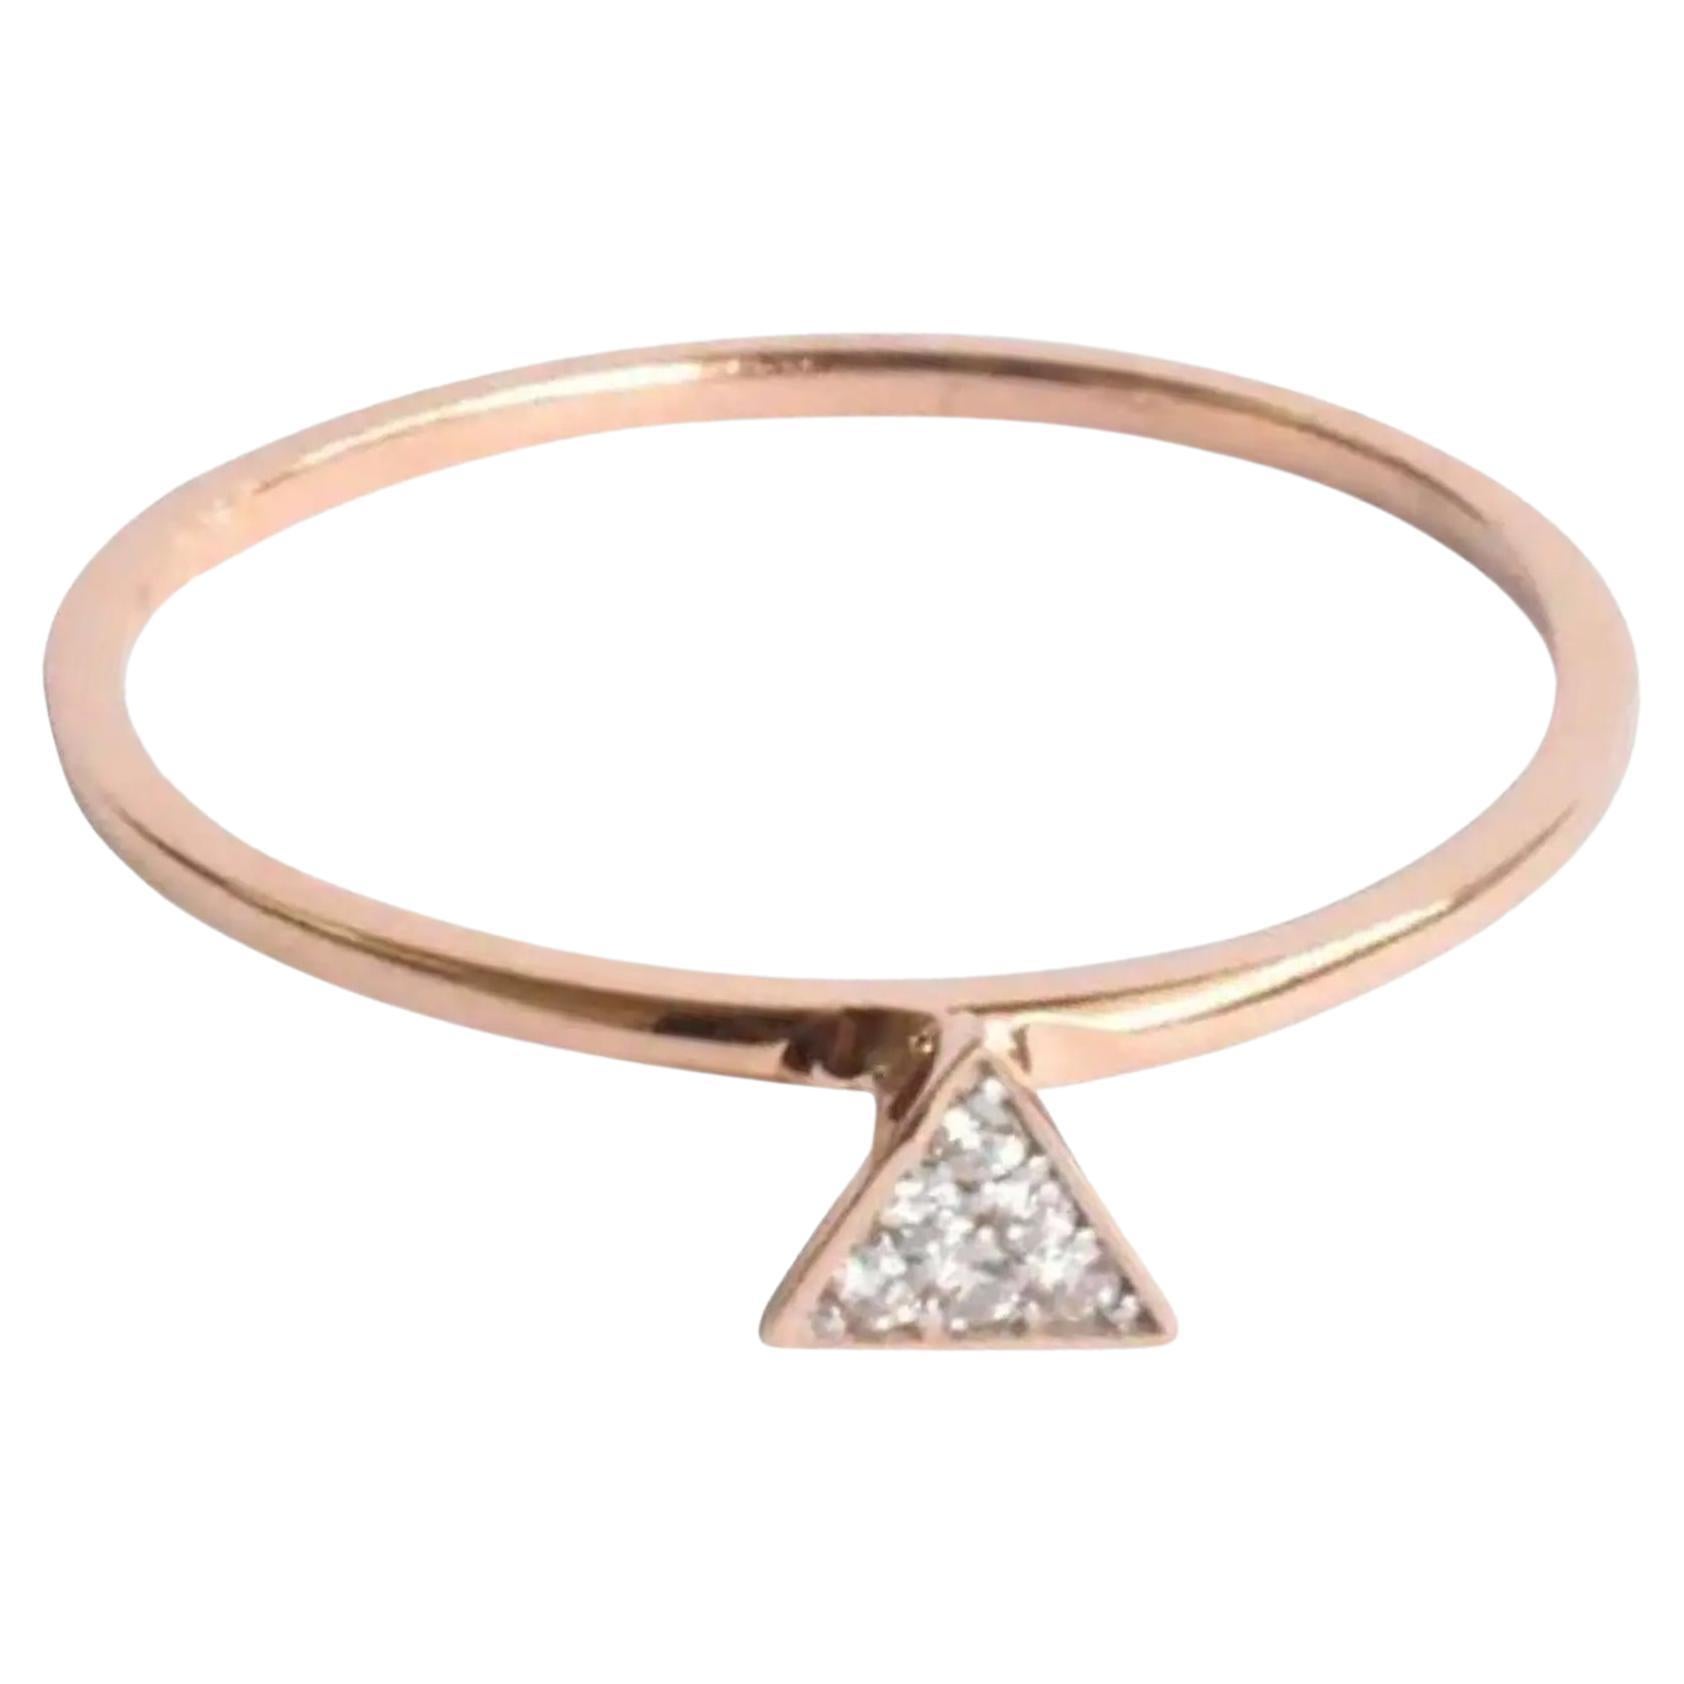 14k Gold Triangle Stacking Ring with White Pave Diamonds Minimalist Ring